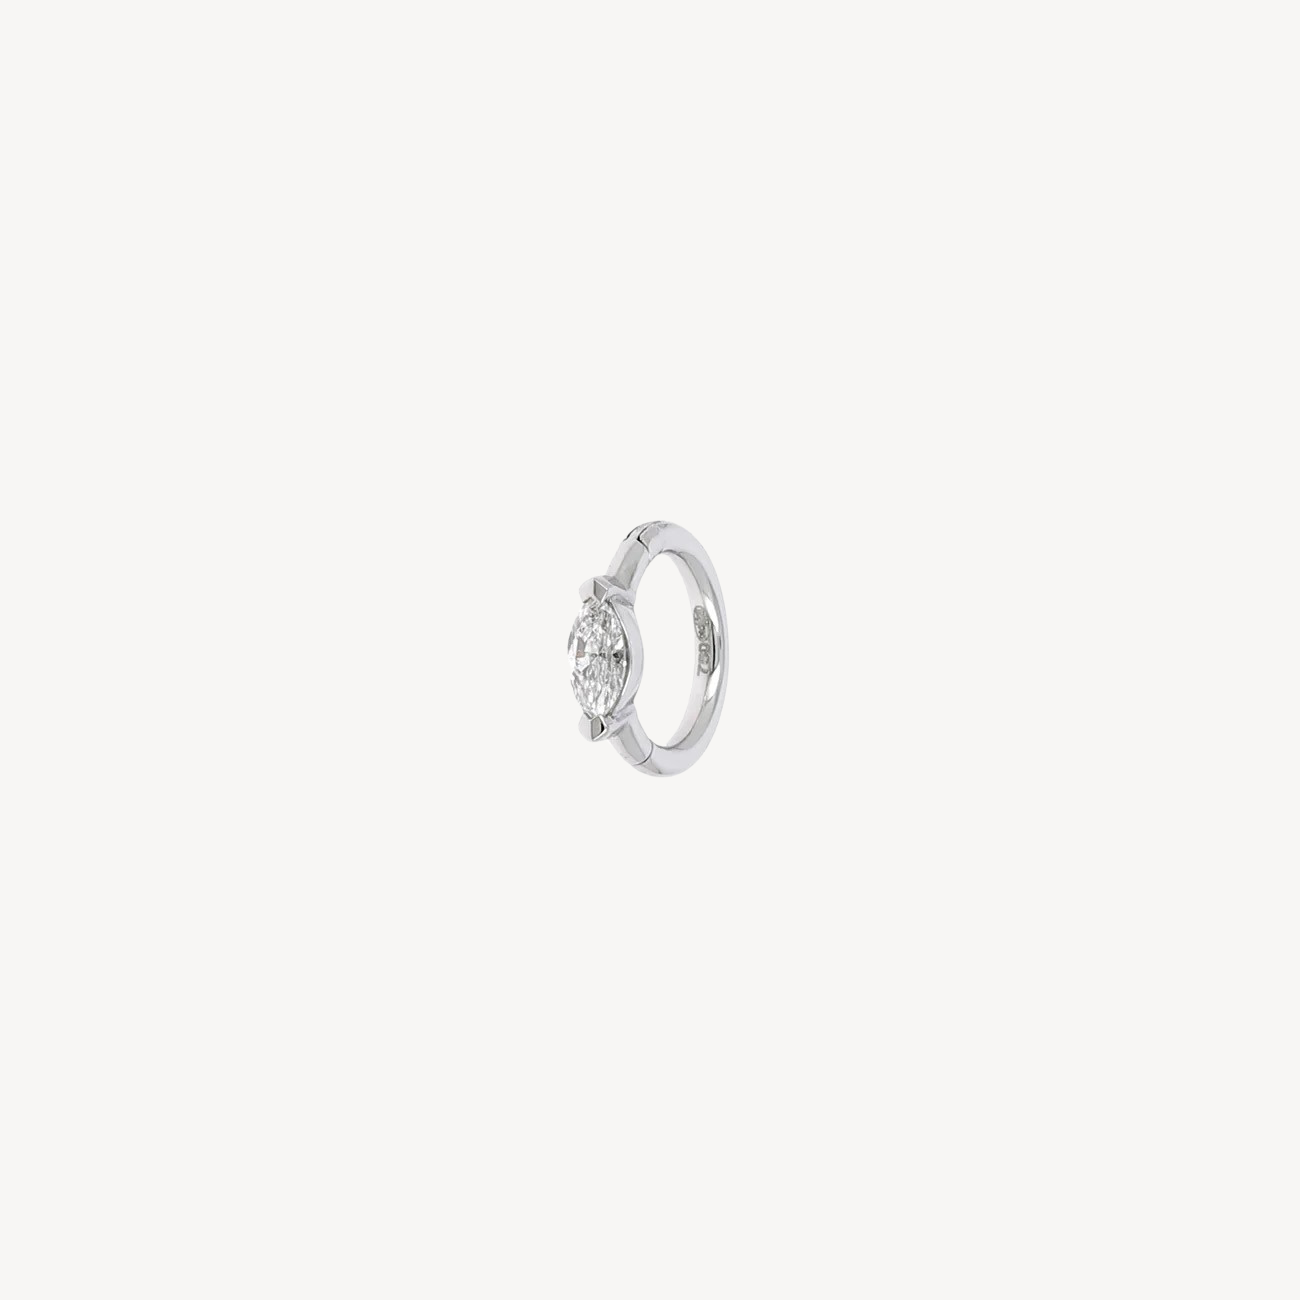 6.5mm White Gold Marquise 4.5x2mm Hoop